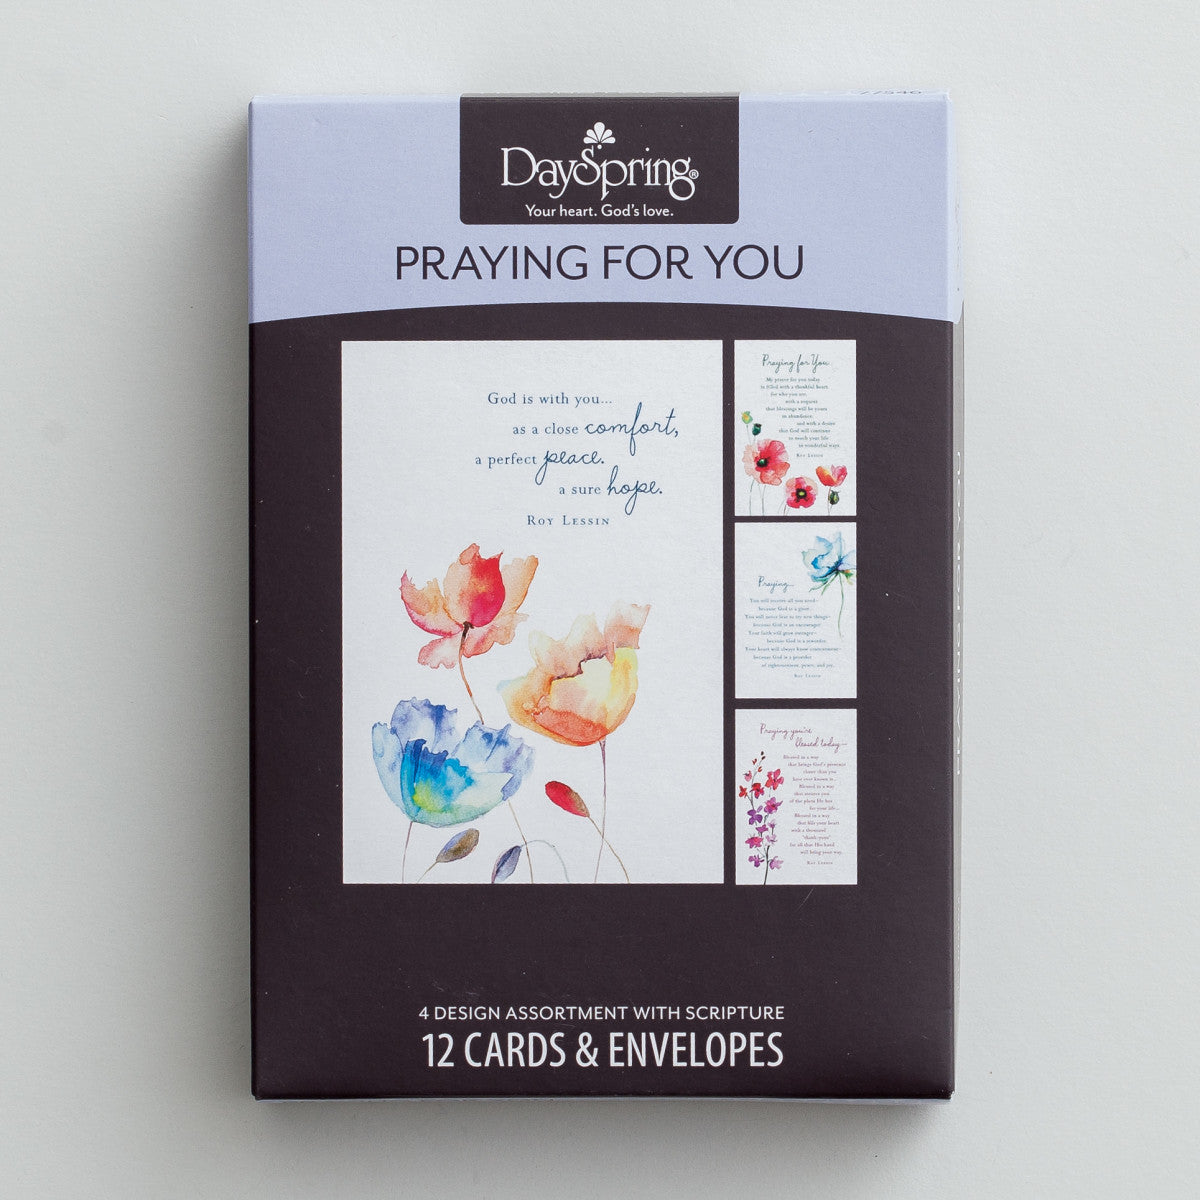 Roy Lessin - Praying for You - Meet Me in the Meadow - 12 Boxed Cards, KJV - The Christian Gift Company